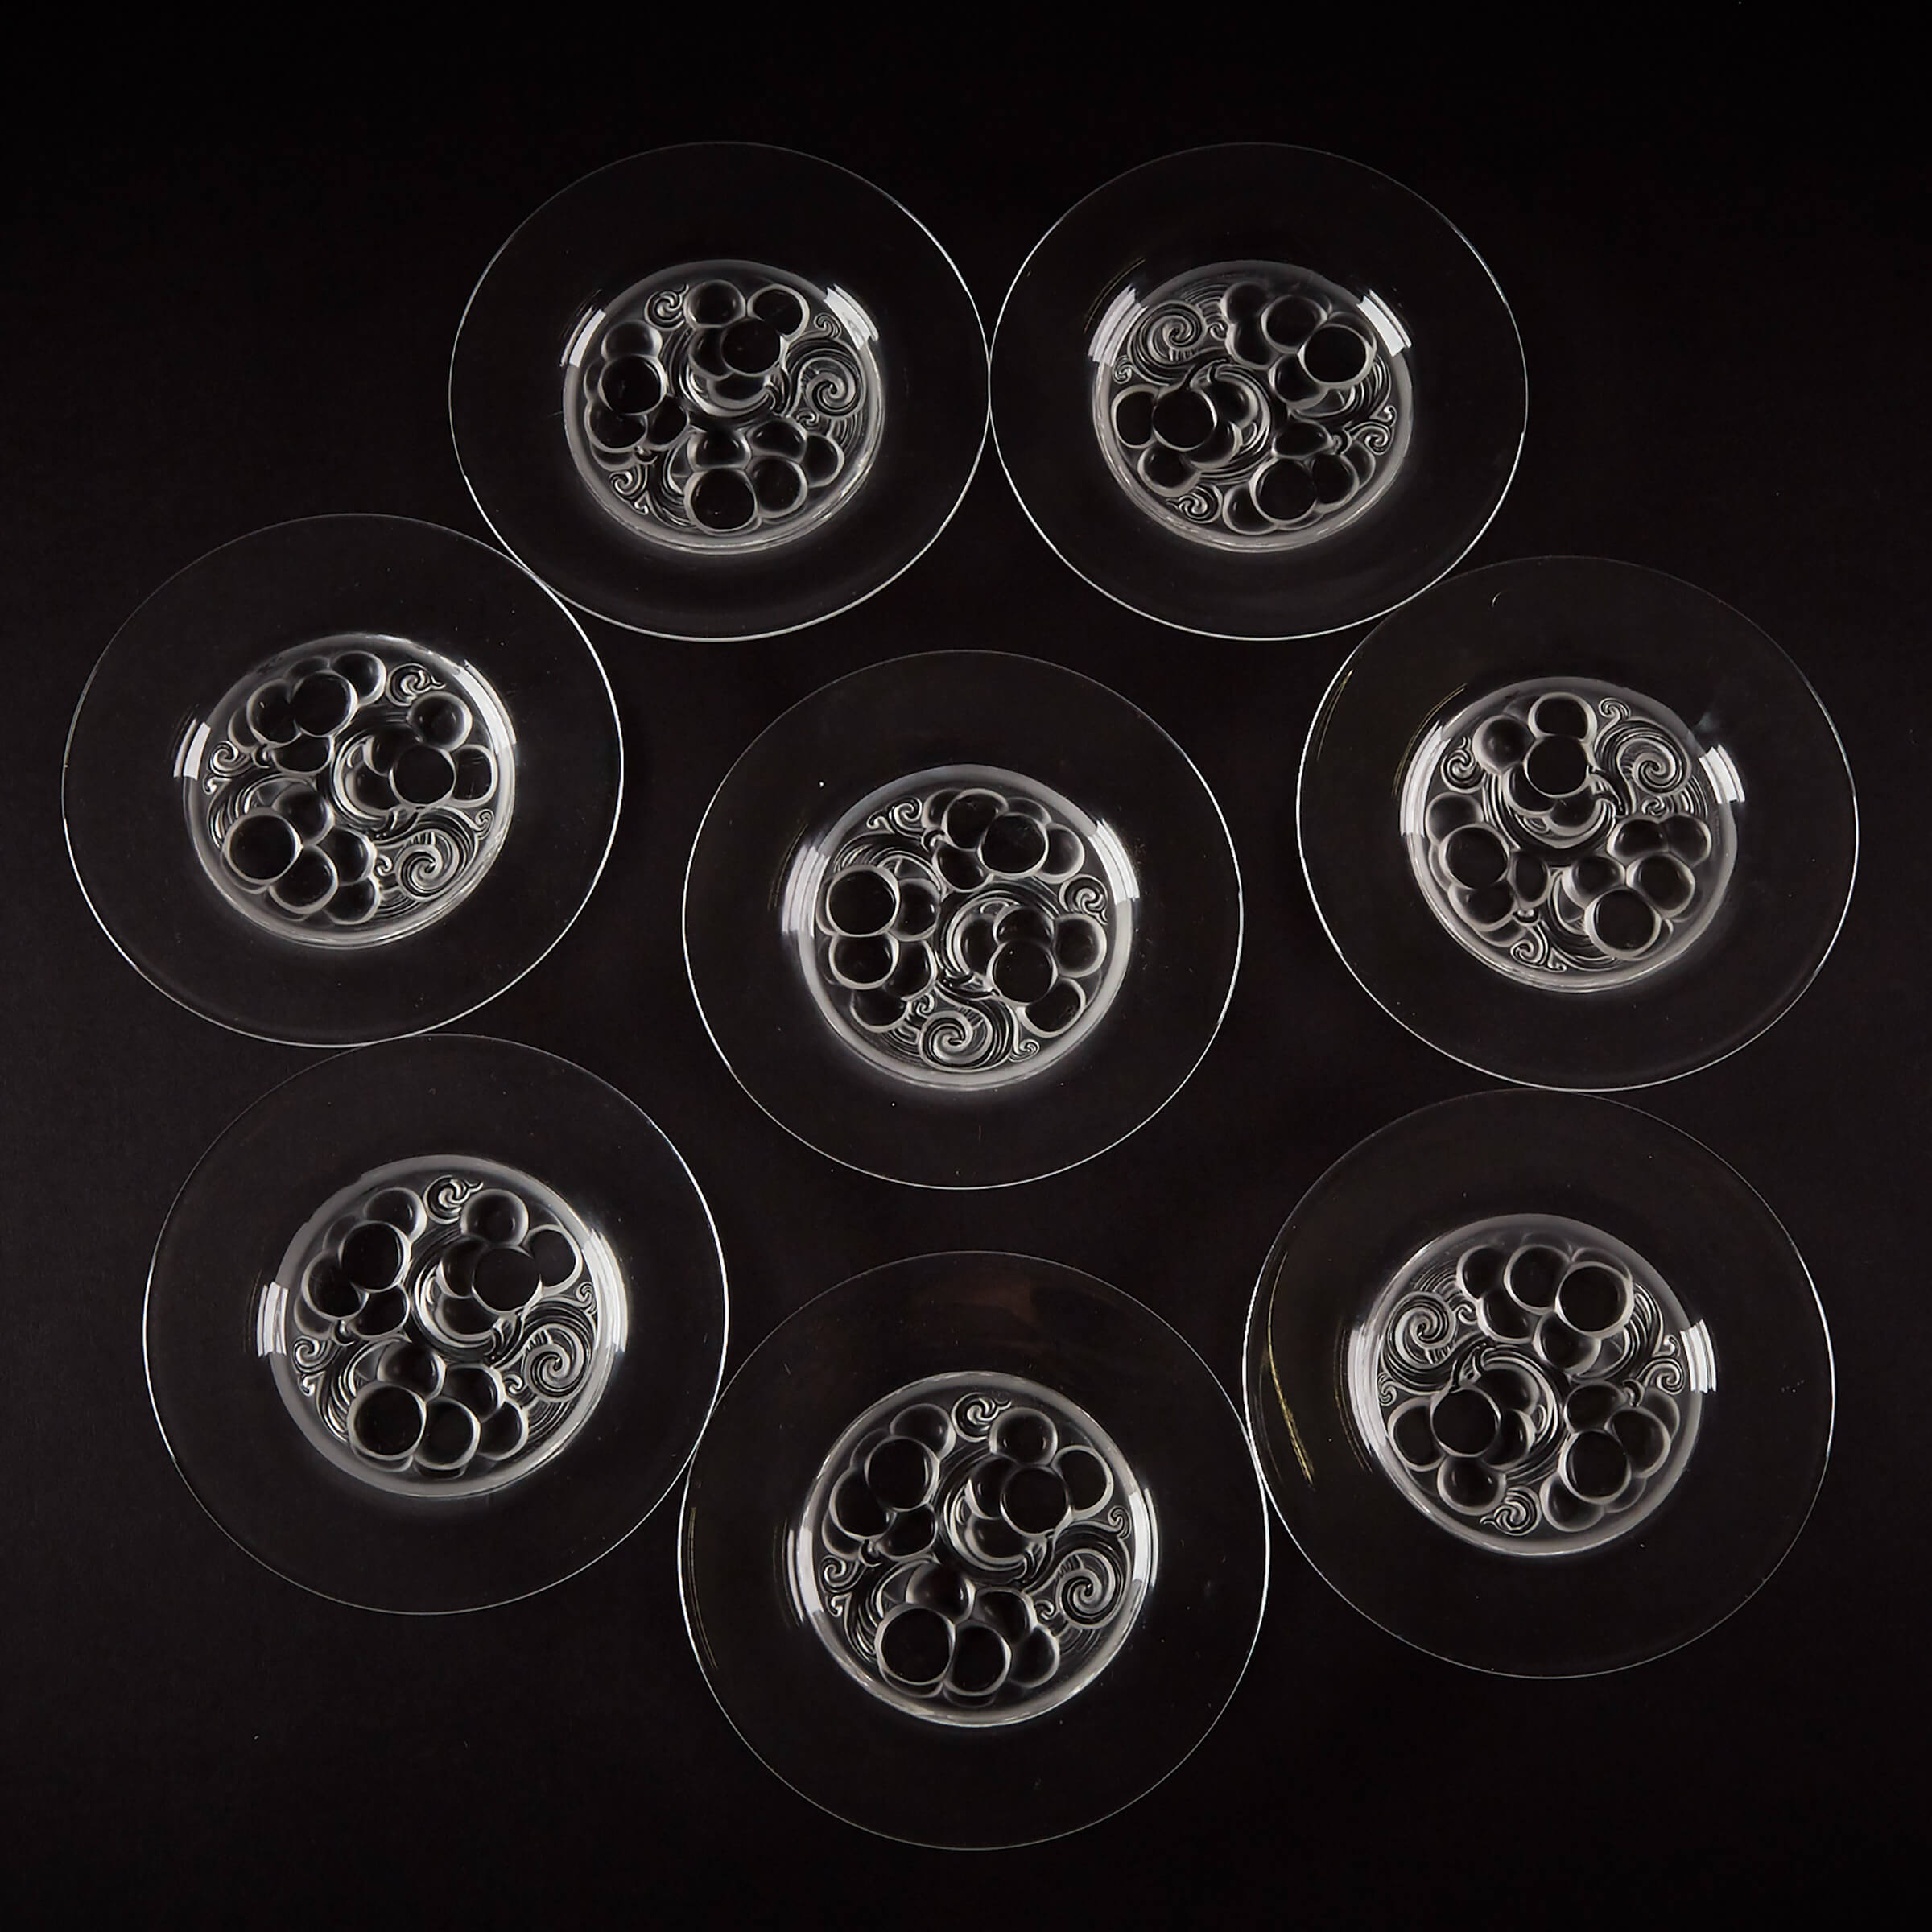 ‘Marienthal’, Eight Lalique Moulded Glass Plates, post-1945